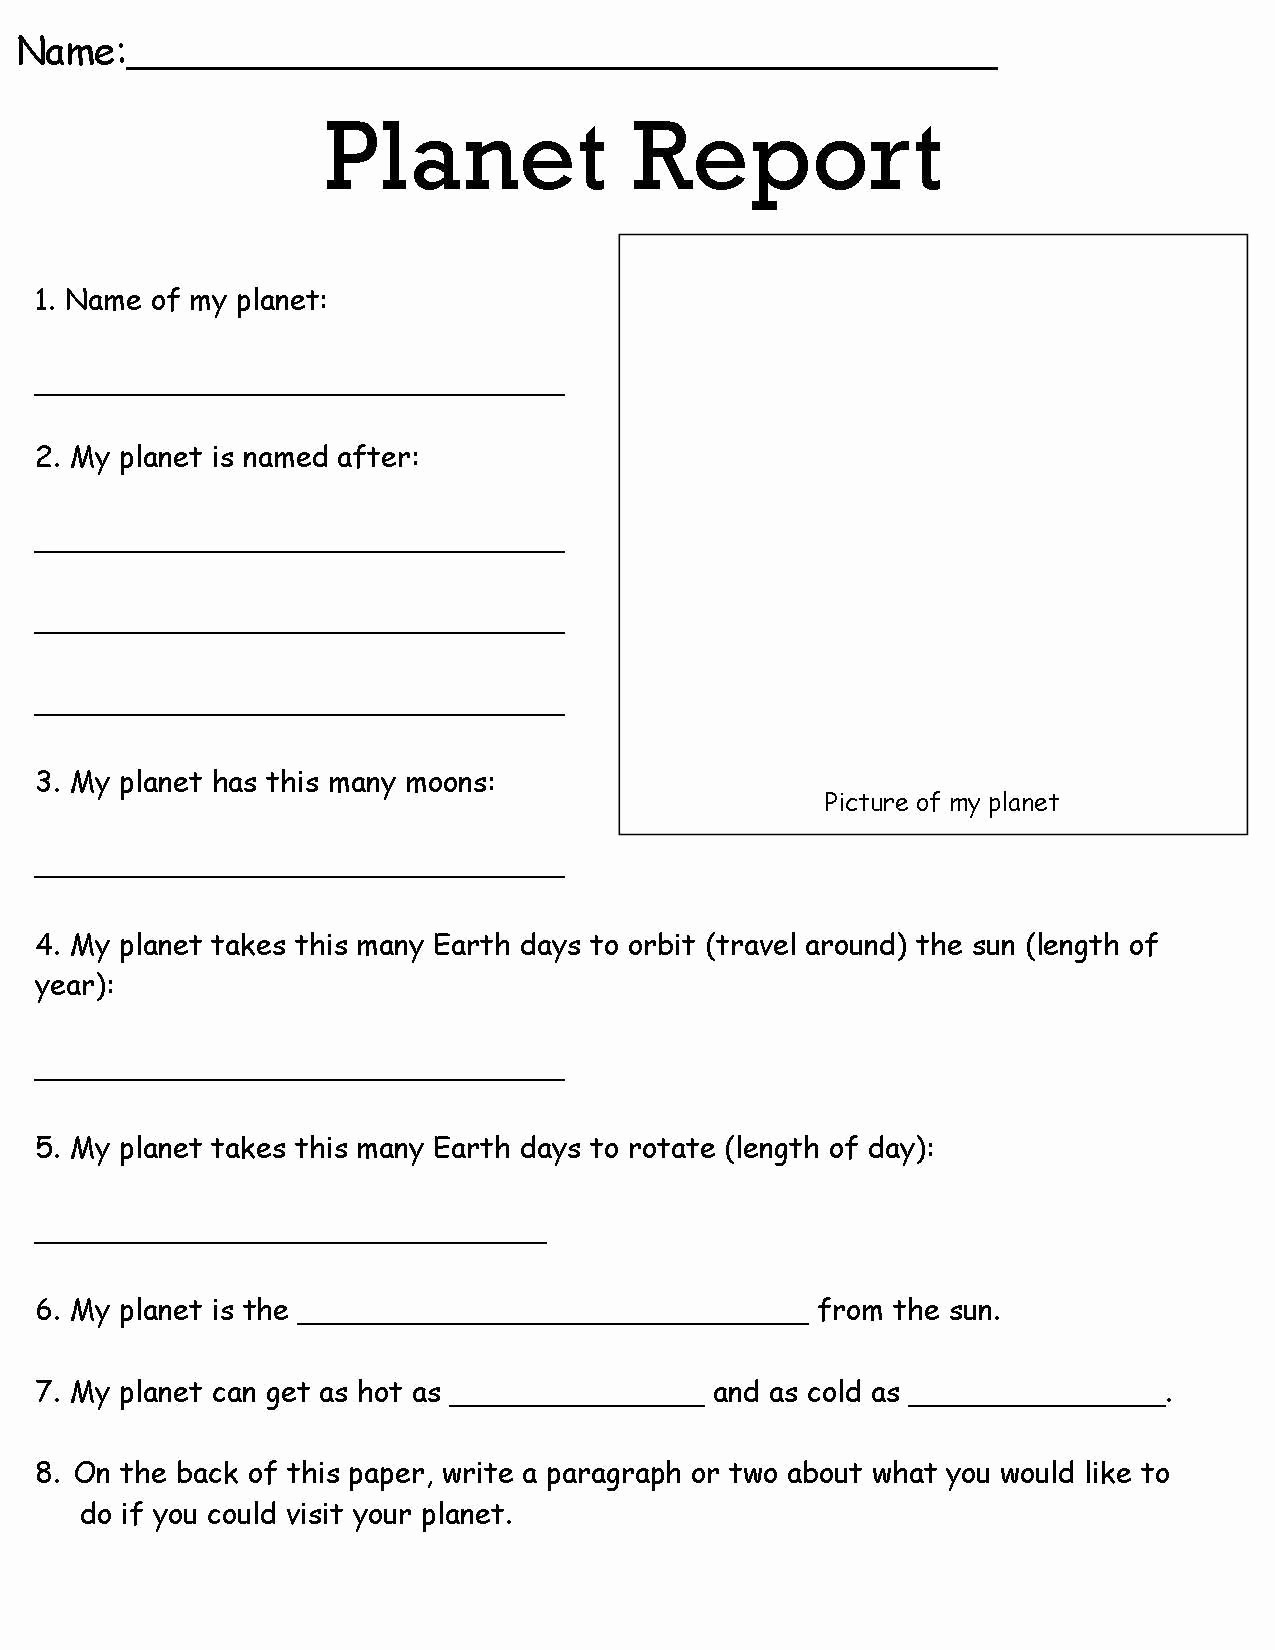 Middle School Science Worksheets Pdf Lovely 20 Middle School Science Worksheets Pdf